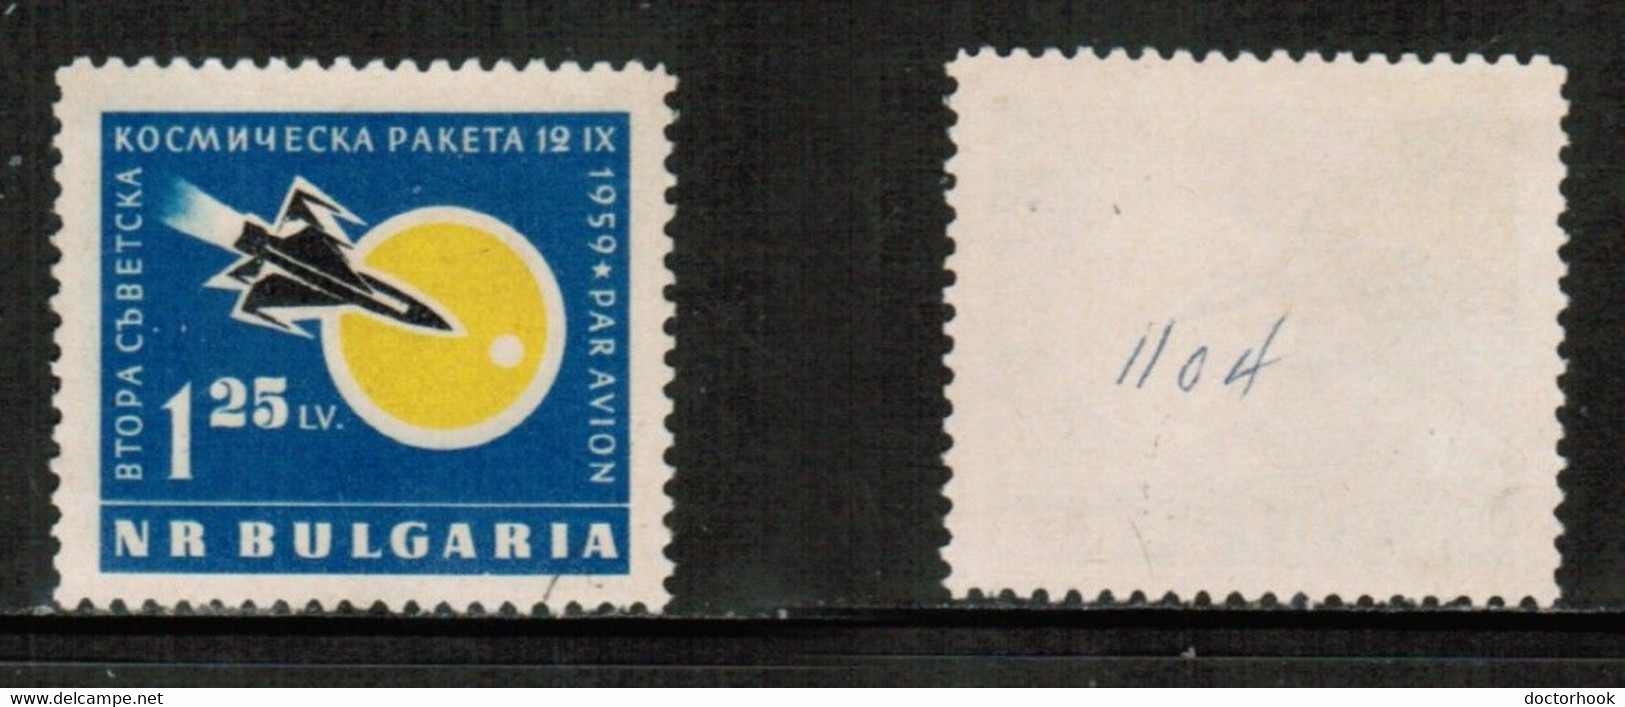 BULGARIA   Scott # C 79 USED (CONDITION AS PER SCAN) (Stamp Scan # 878-6) - Corréo Aéreo